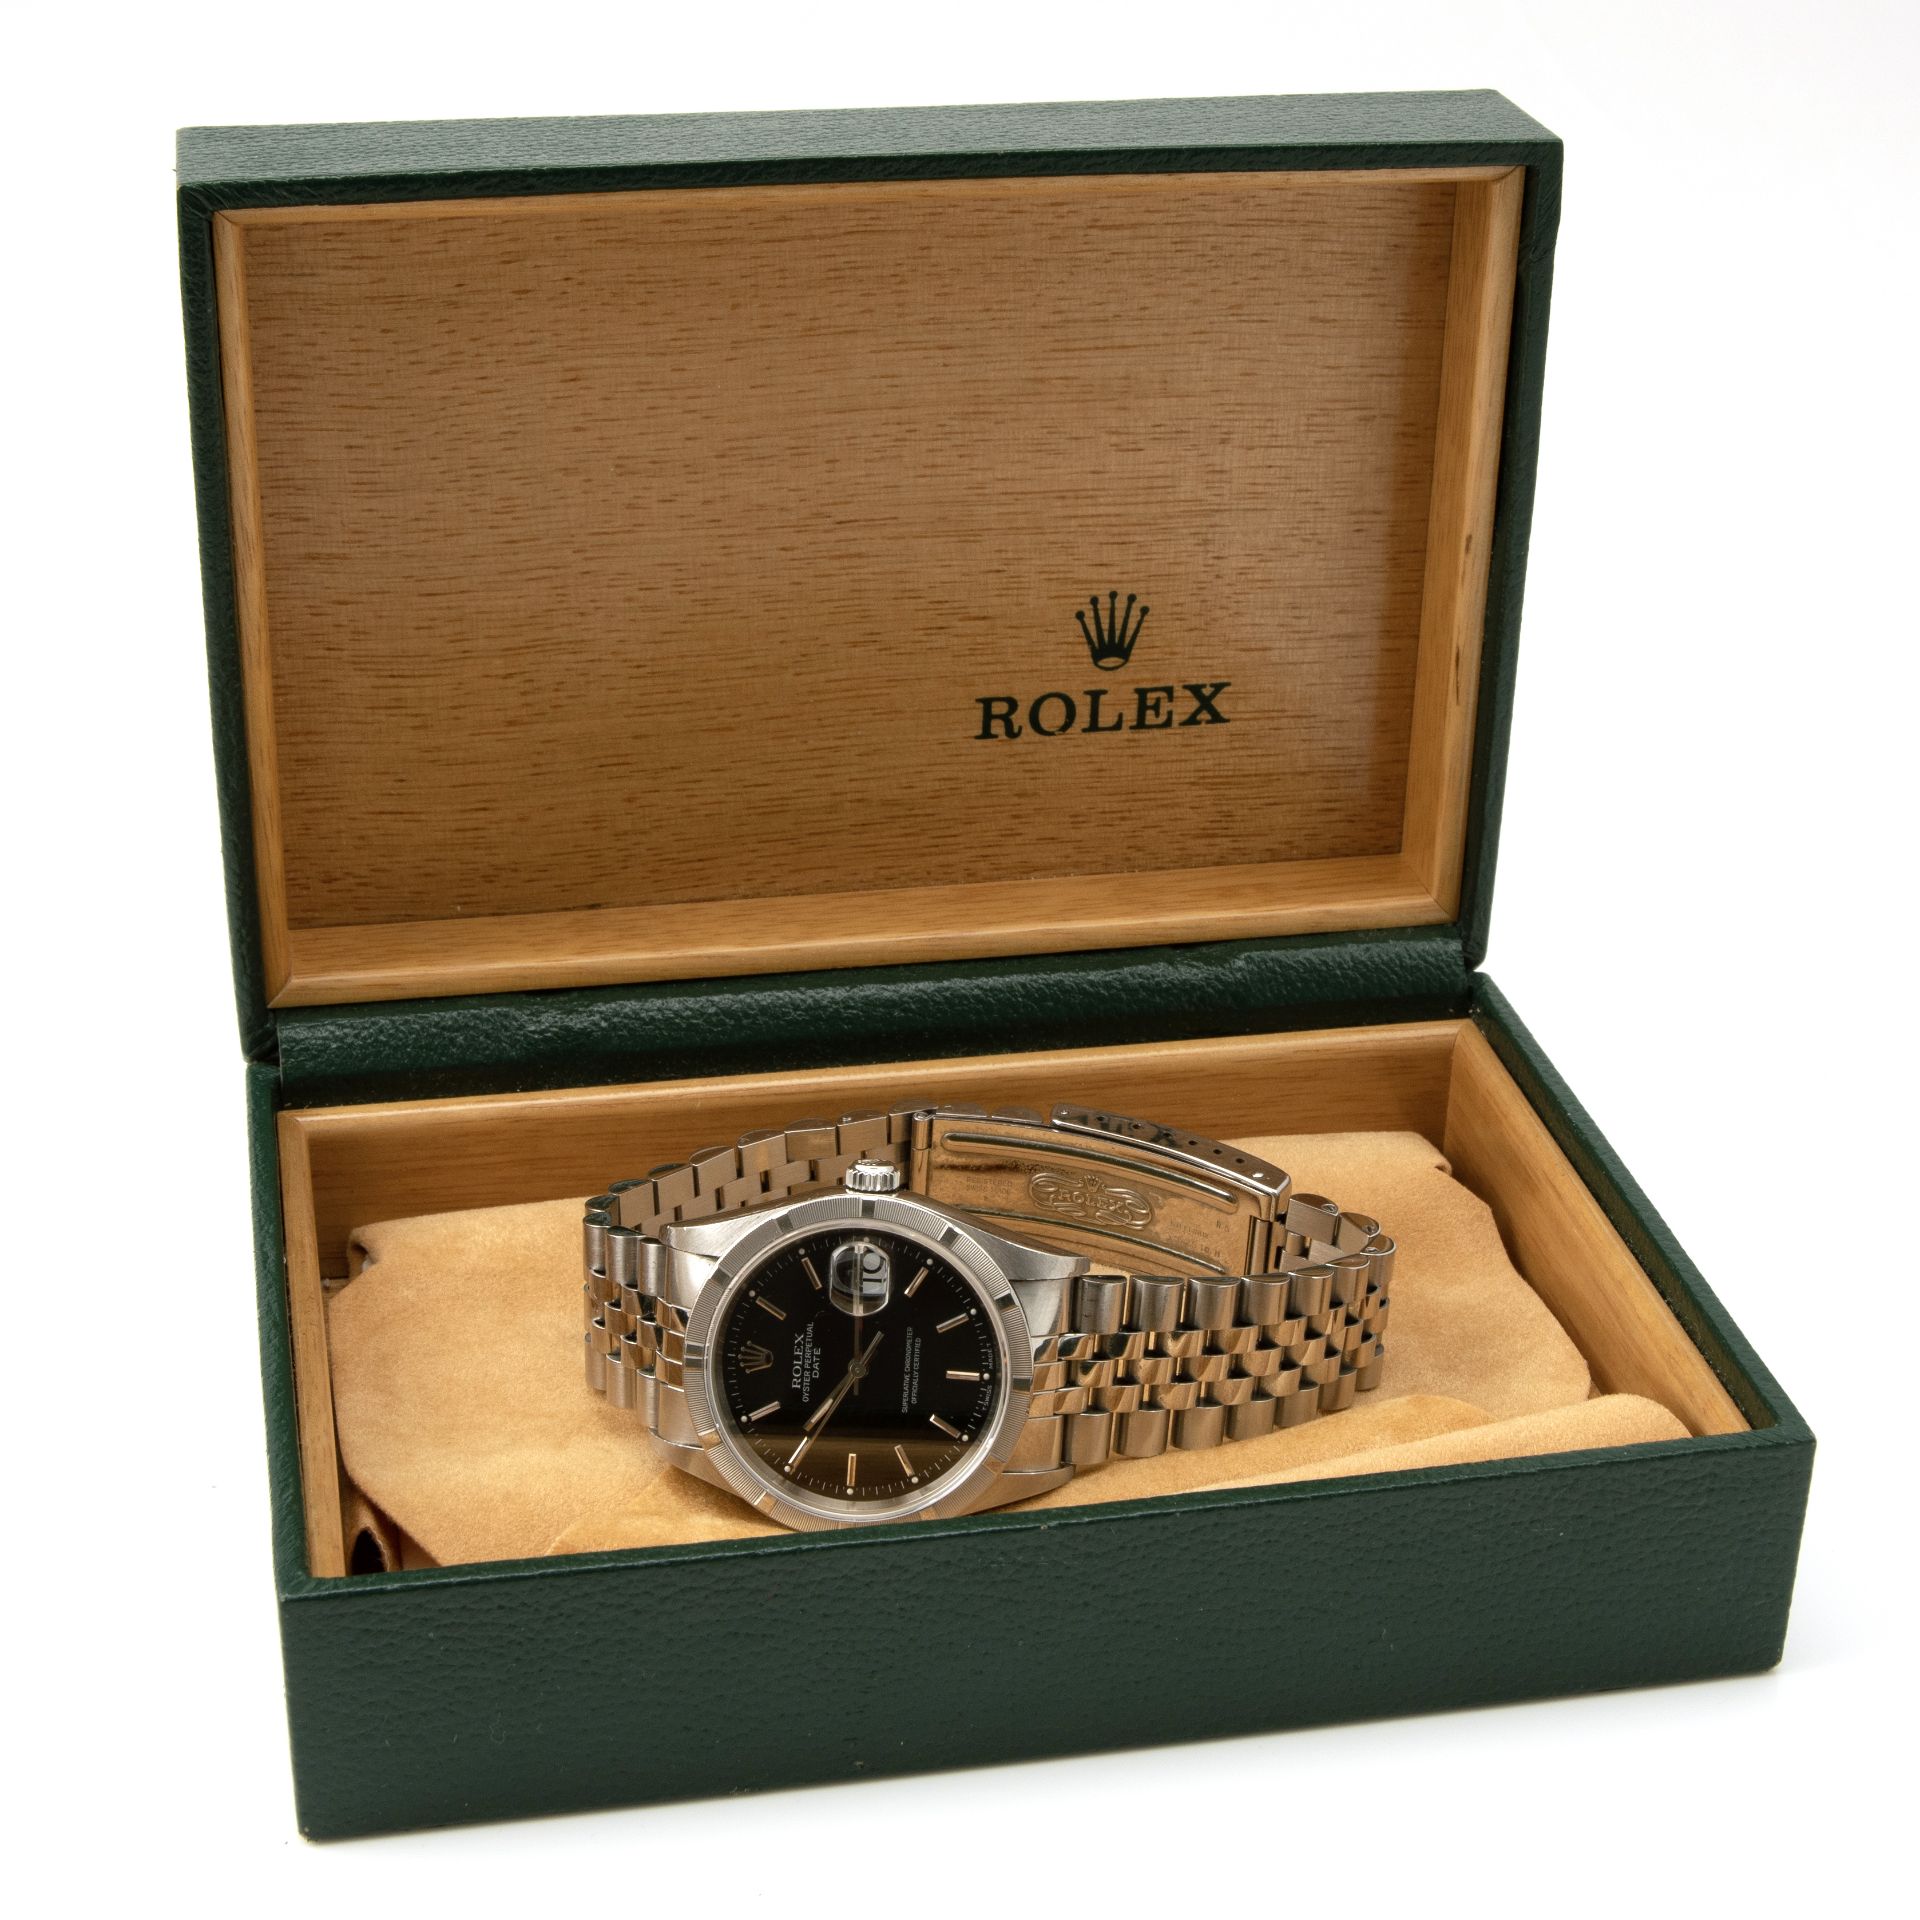 Rolex Oyster Perpetual Date - Image 4 of 4